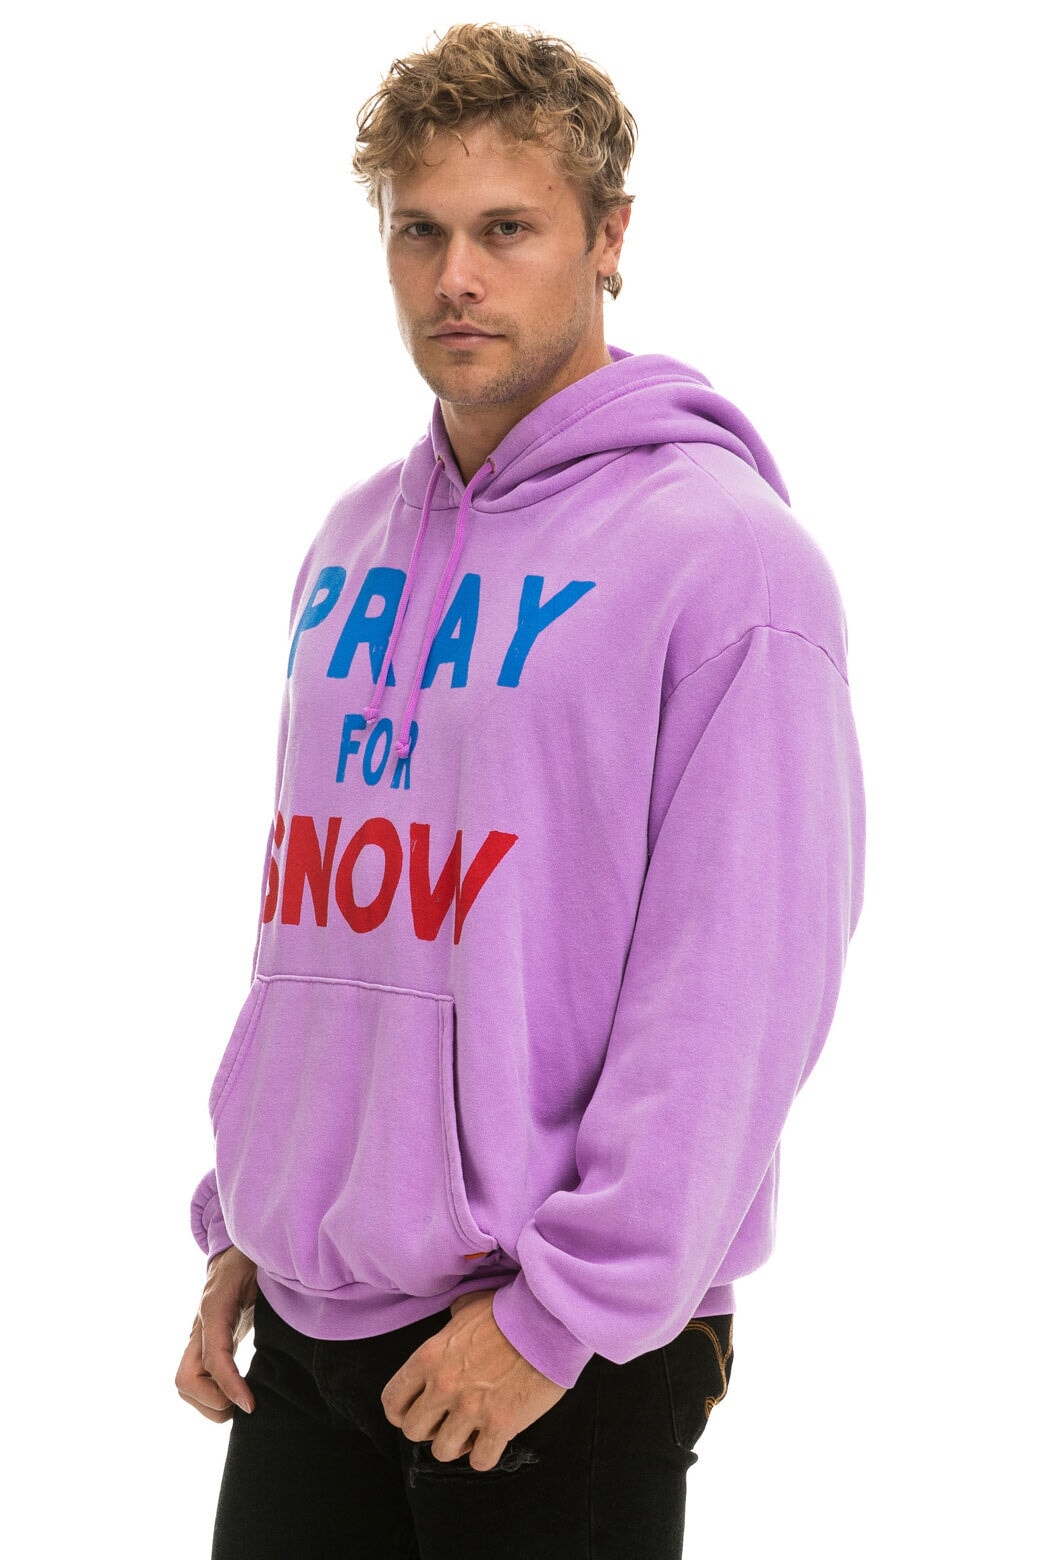 PRAY FOR SNOW RELAXED PULLOVER HOODIE - NEON PURPLE Hoodie Aviator Nation 